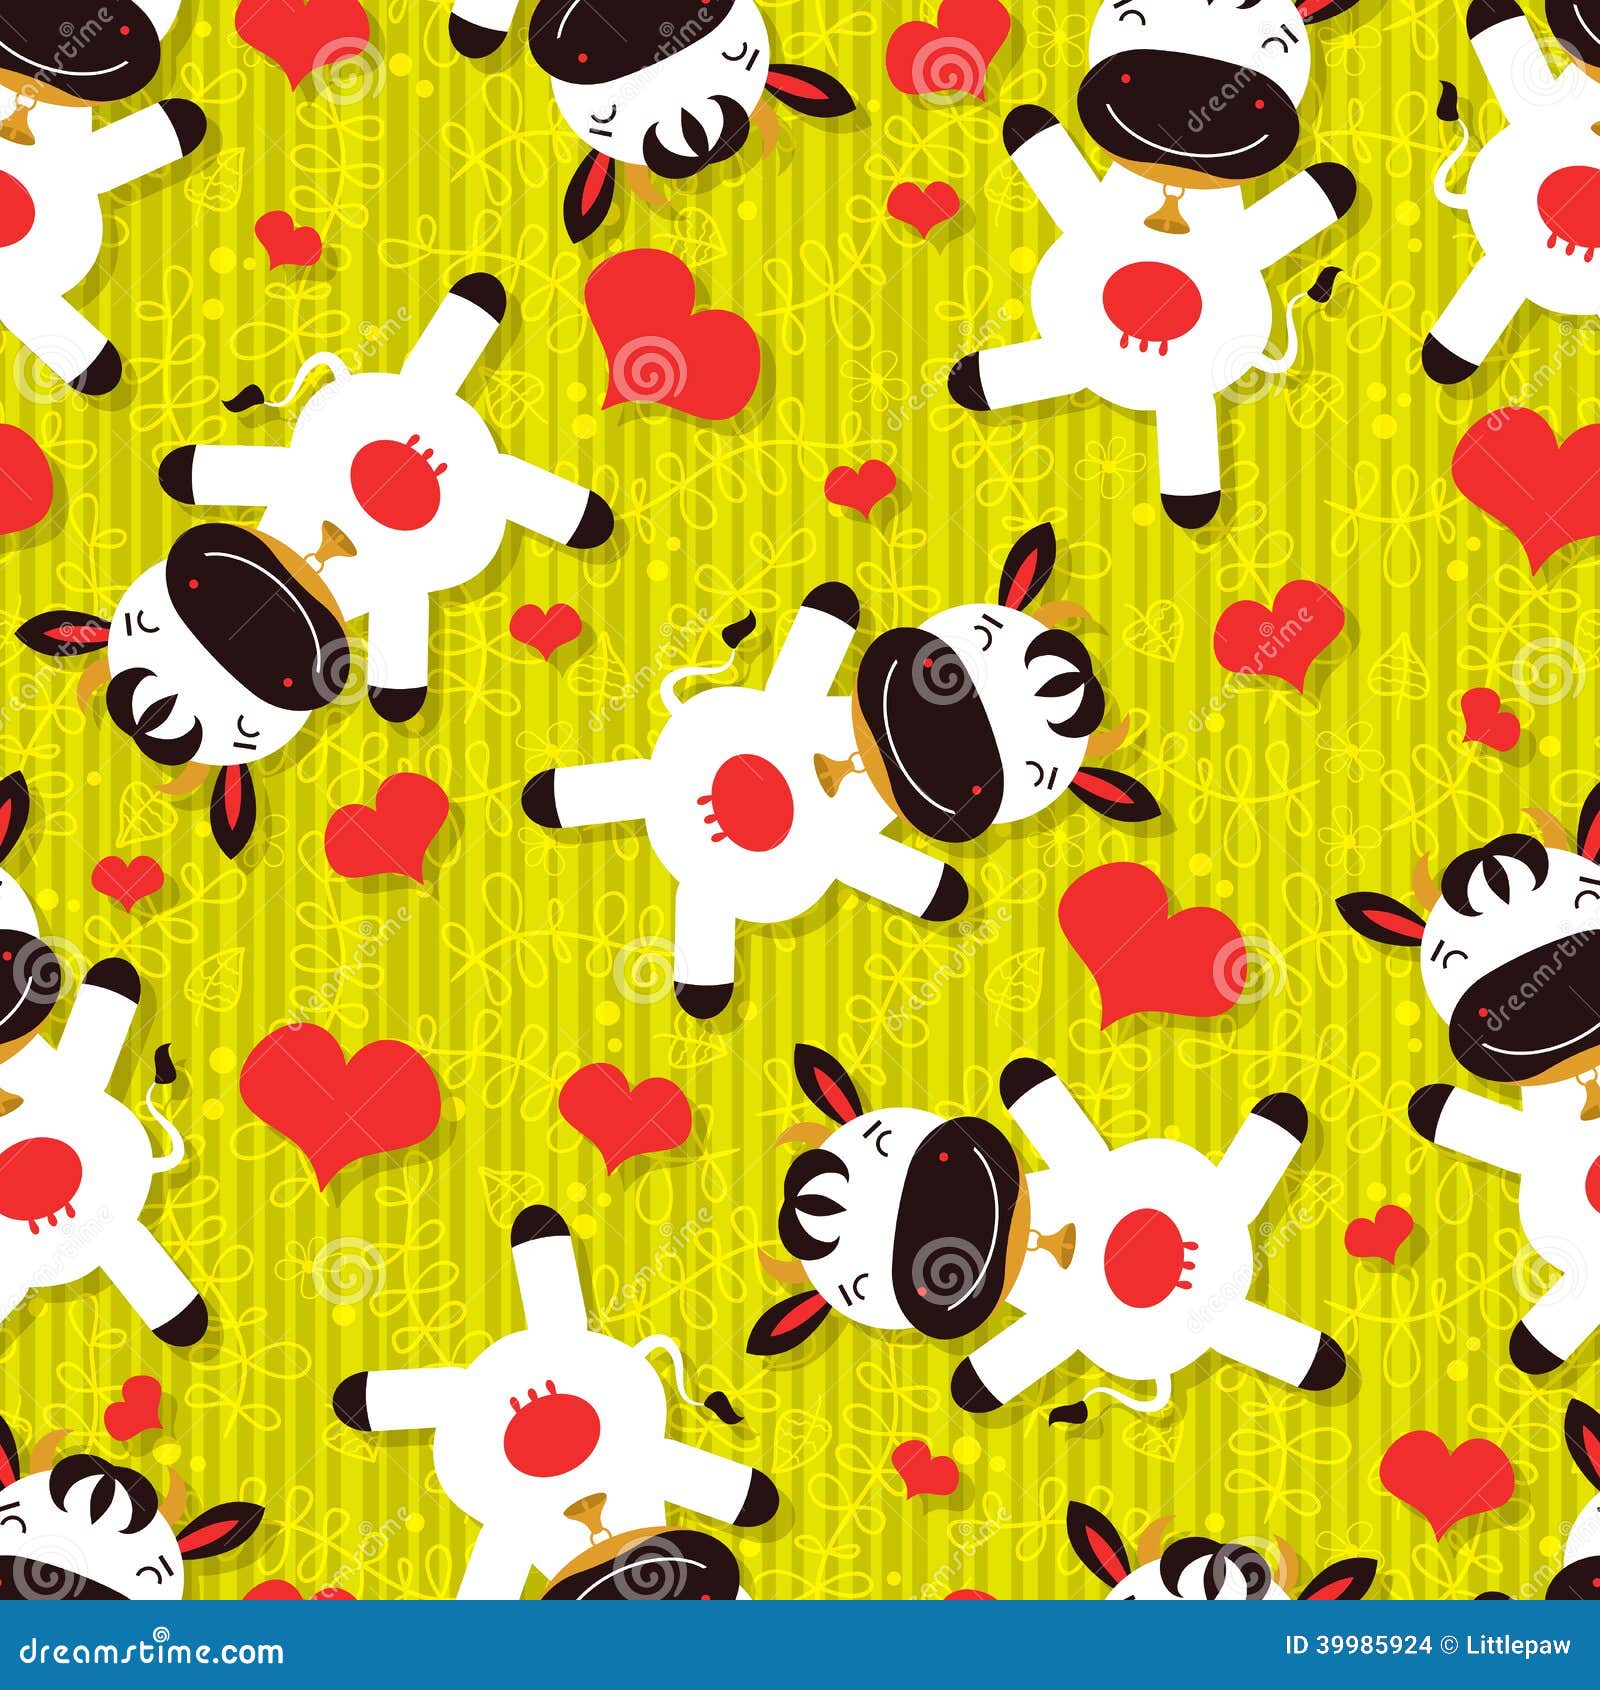 Premium Vector  Cute cow seamless repeating pattern, wallpaper background,  cute seamless pattern background